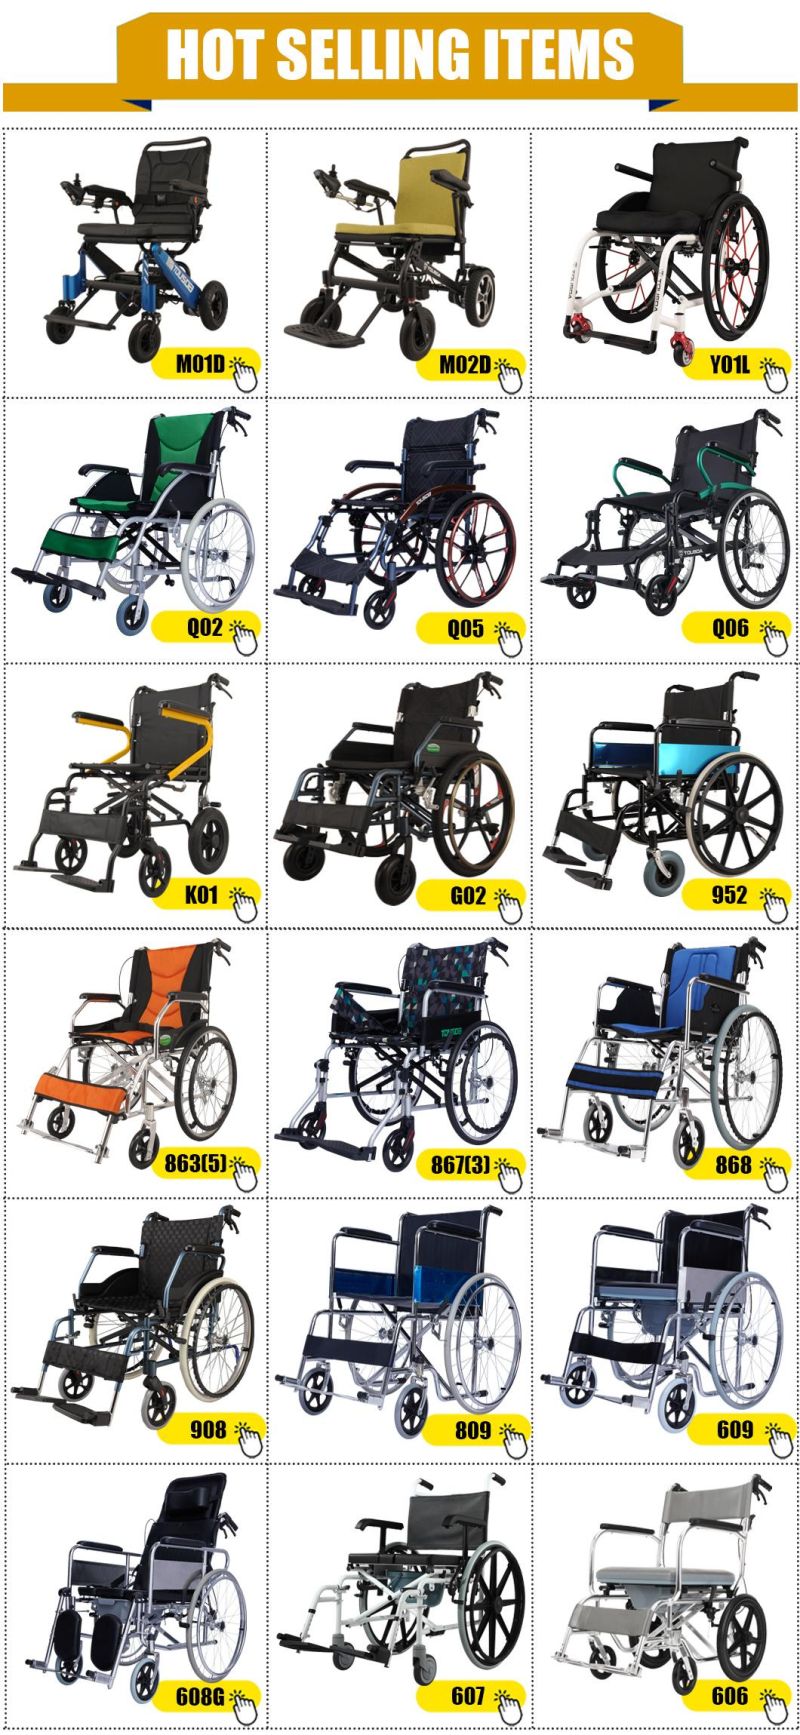 Silla De Ruedas Scooter Price Medical Aluminum Toilet Shower Commode Sport Folding Manual Power Remote Control Folding Wheelchair Electric for Disabled People